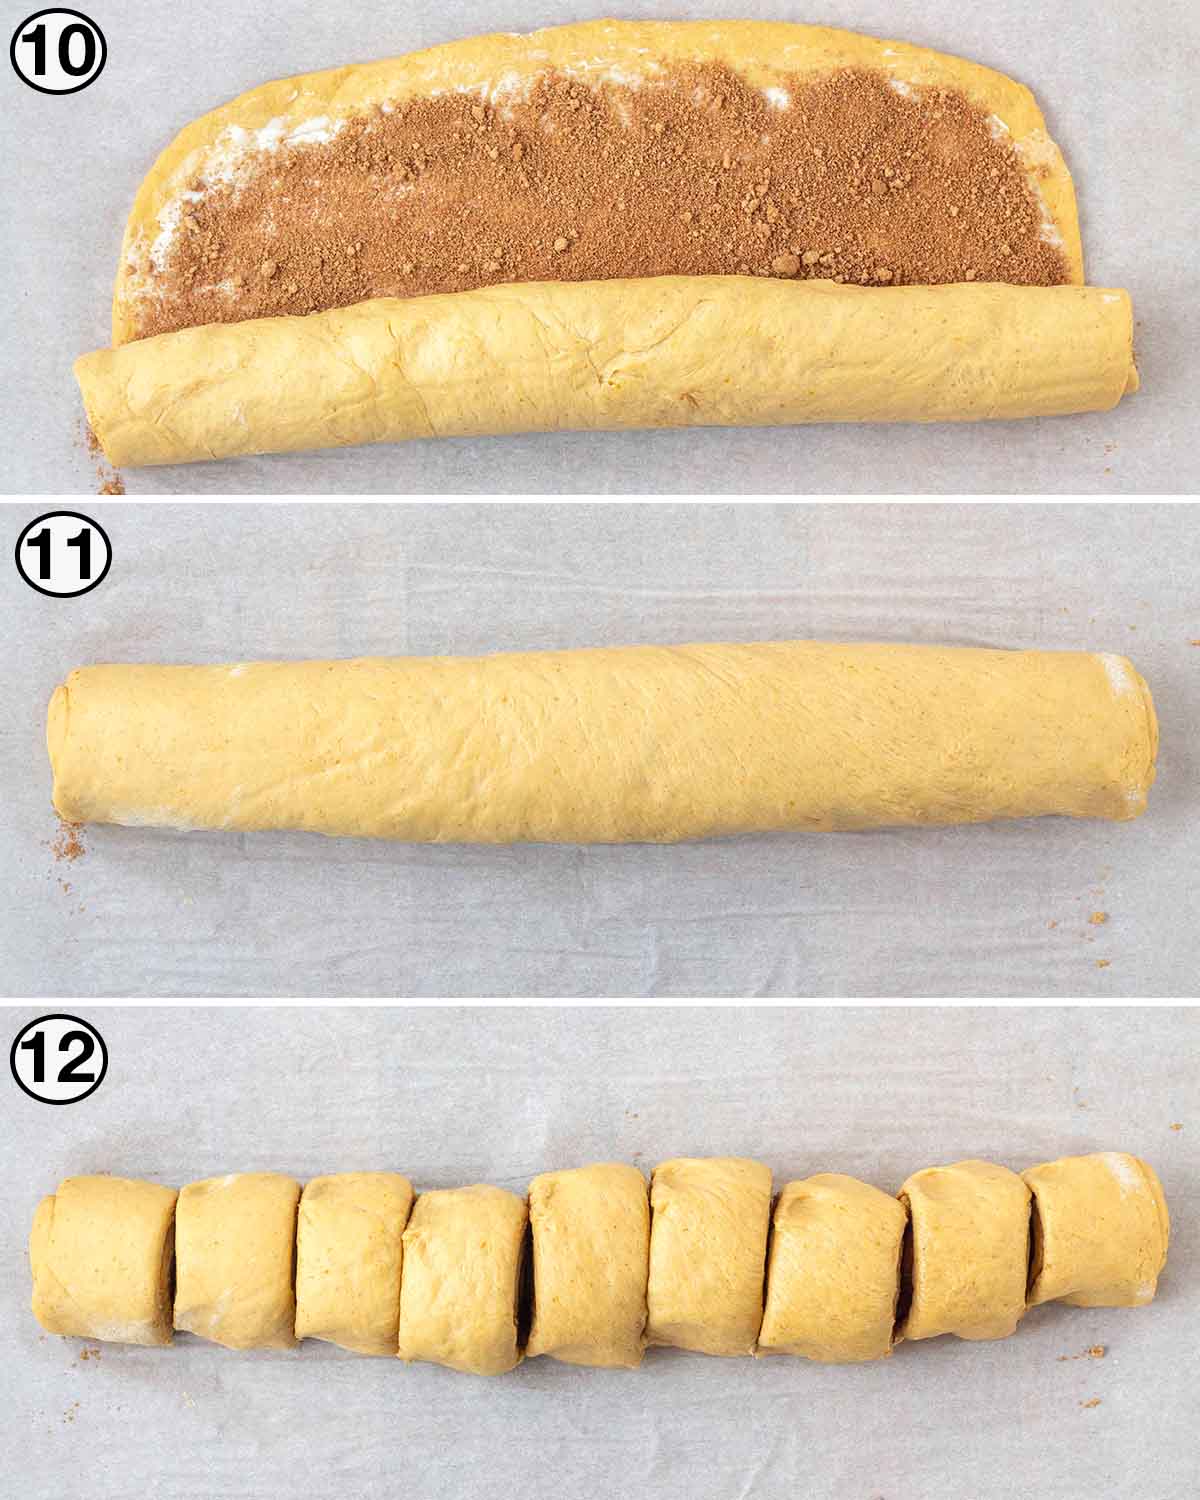 A collage of three images showing the fourth sequence of steps needed to make vegan pumpkin cinnamon rolls.